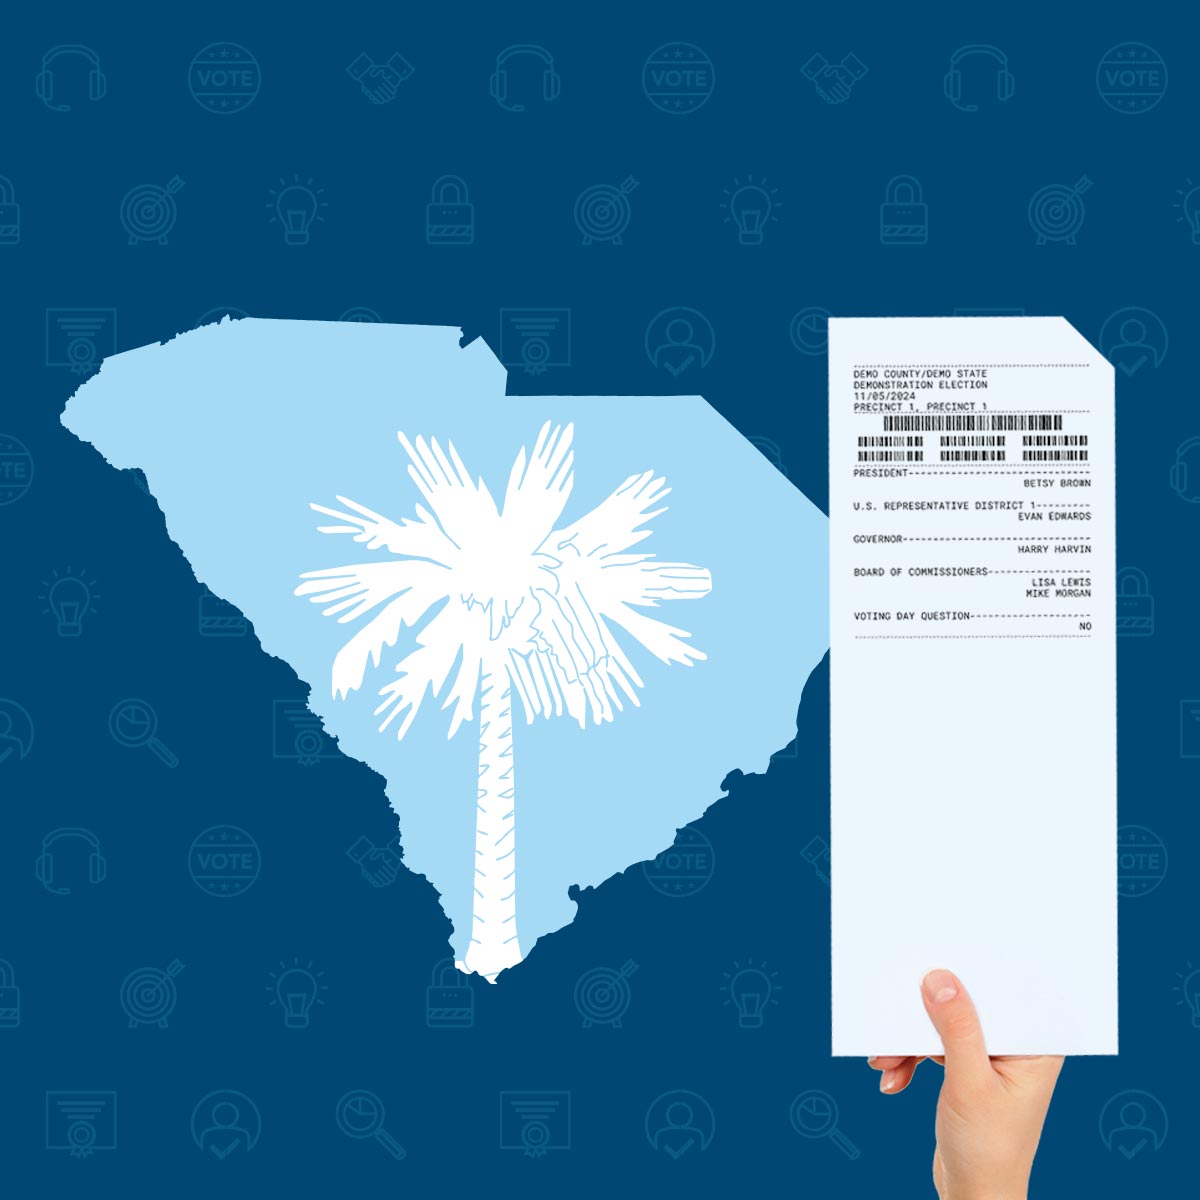 The shape of South Carolina with the palmetto from the state flag inset, next to a person's hand holding a voted paper ballot card.